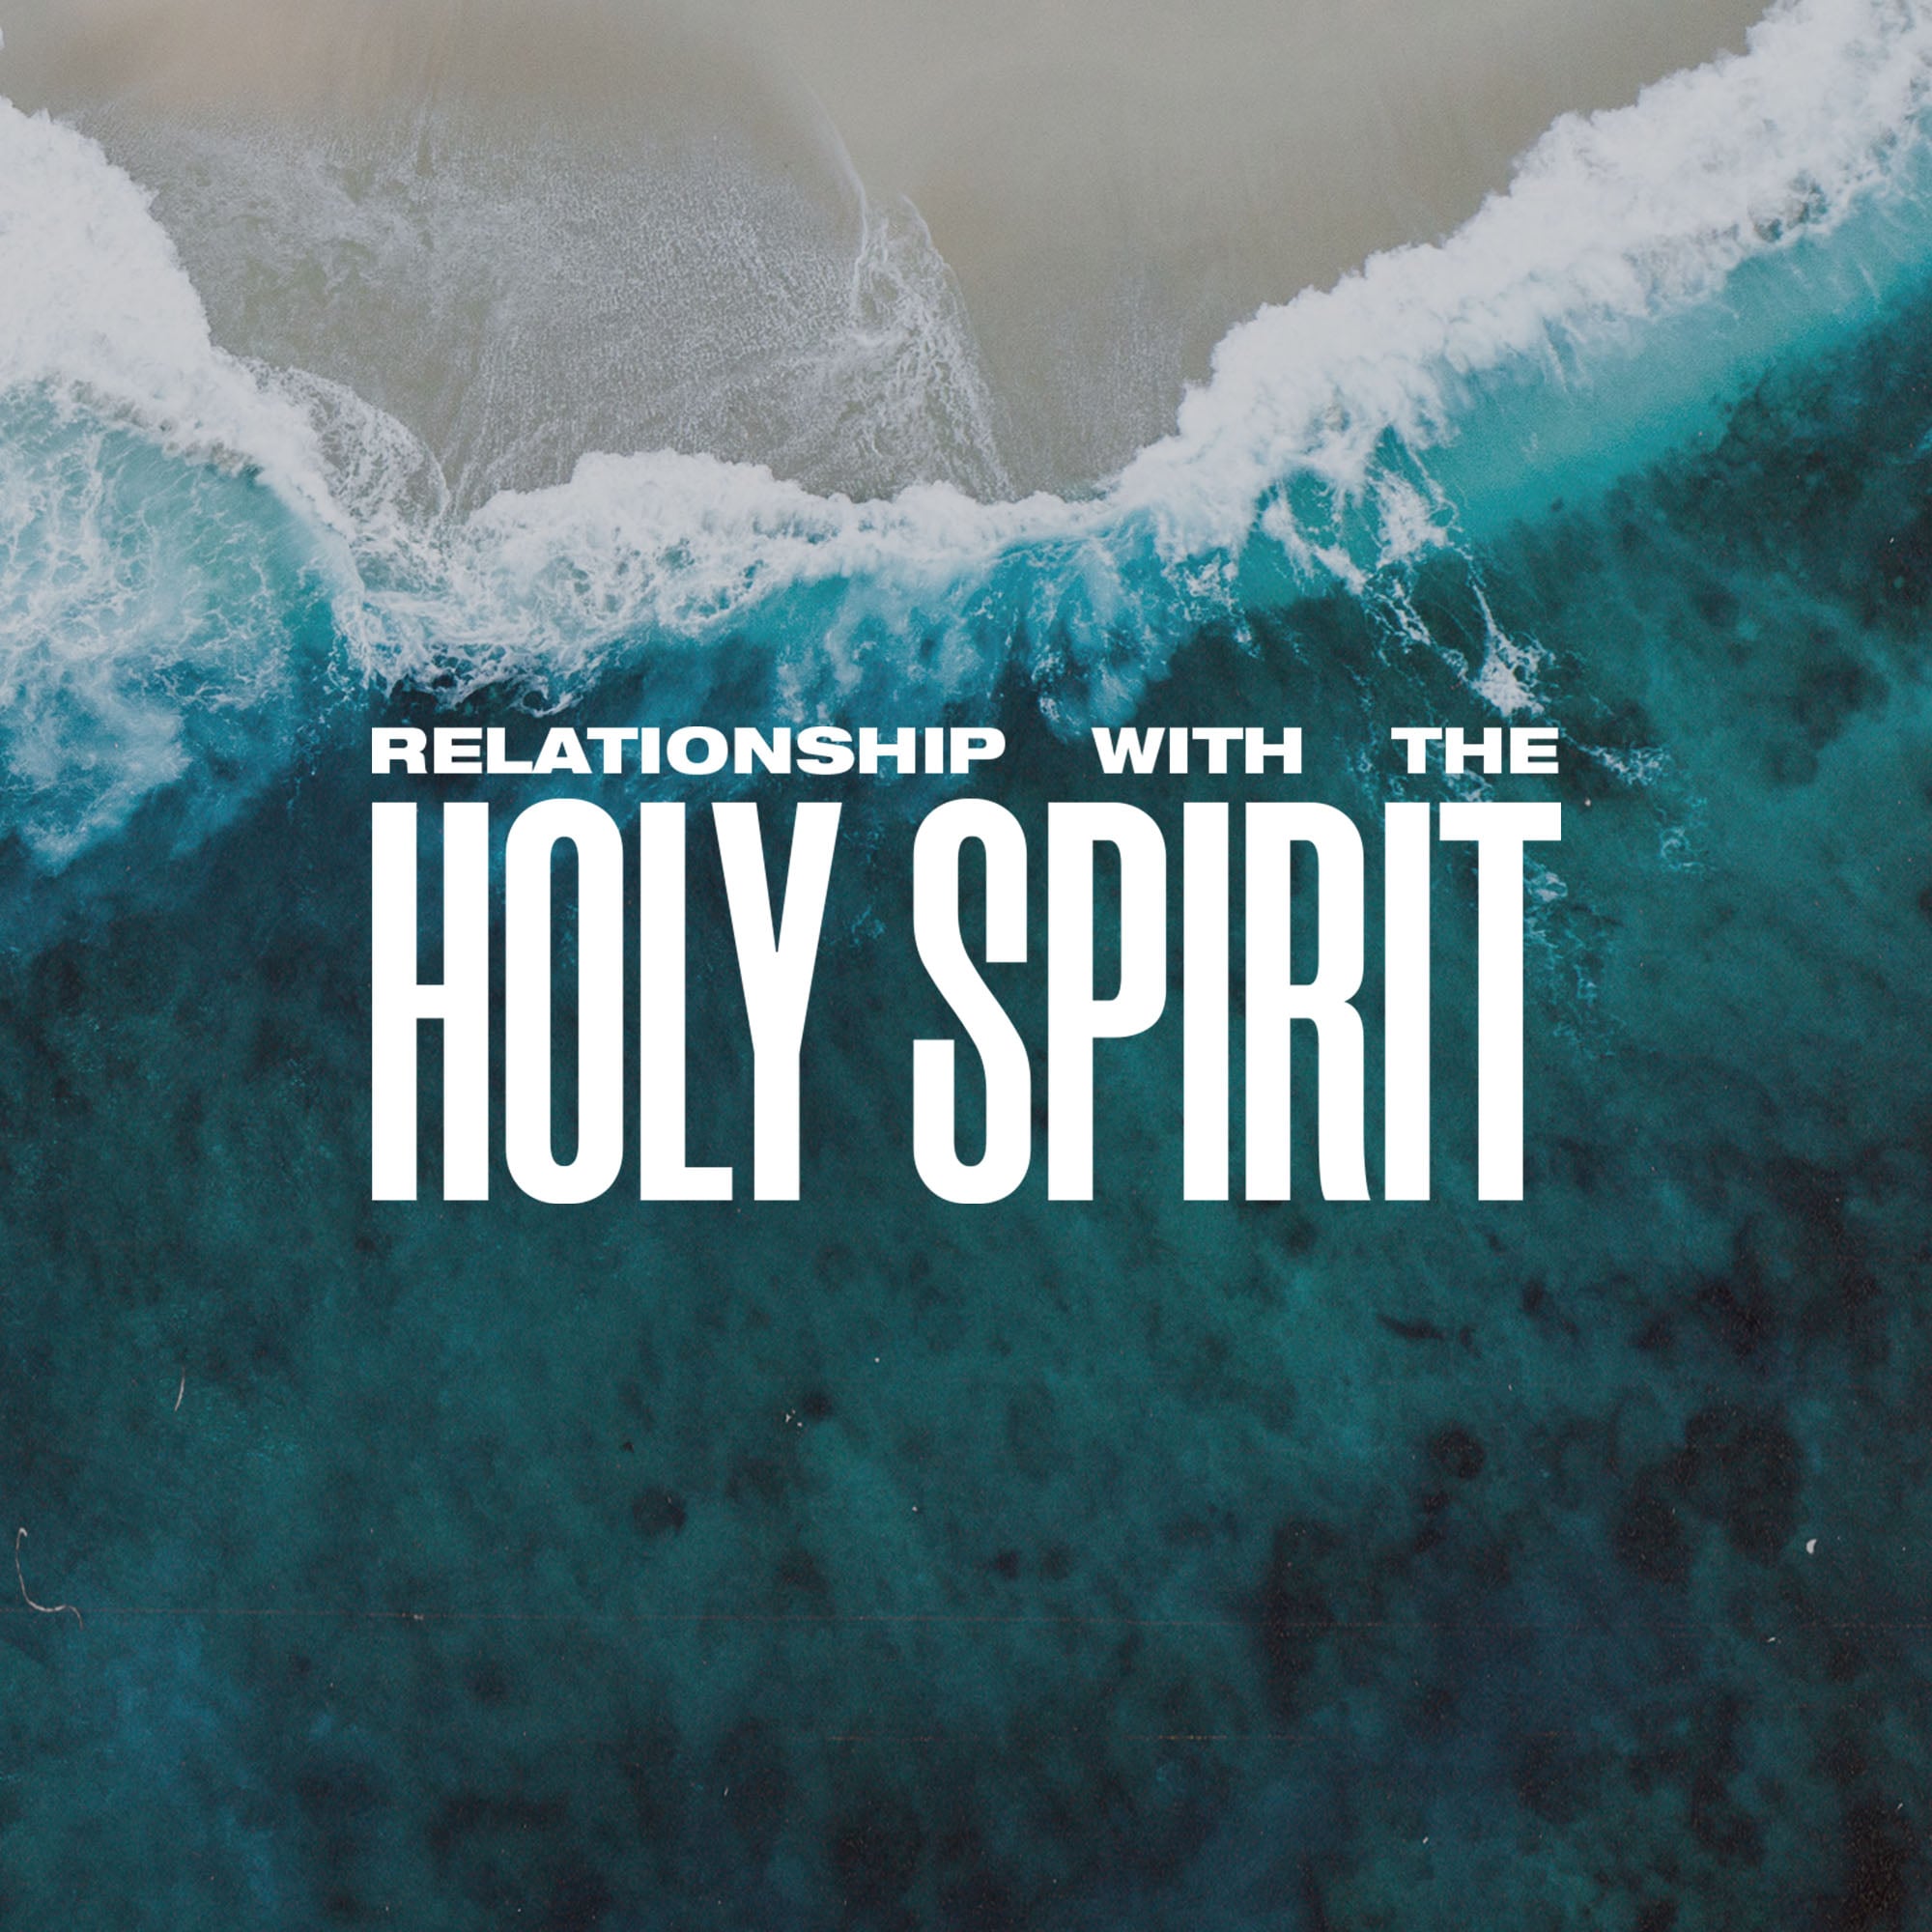 Featured Image for “Relationship with the Holy Spirit”